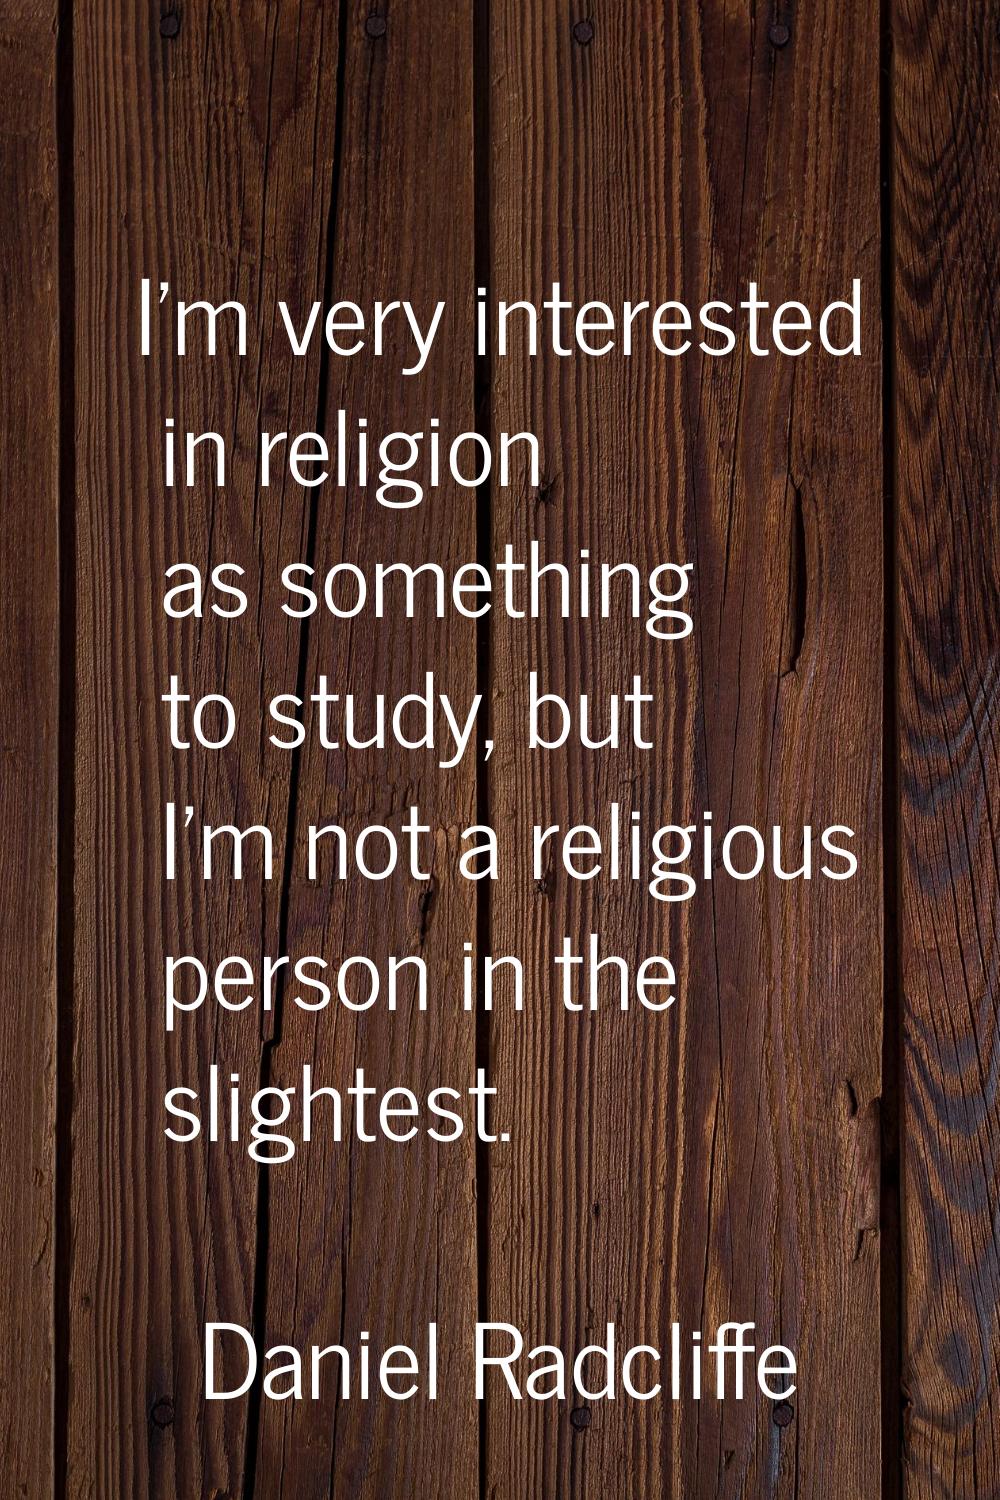 I'm very interested in religion as something to study, but I'm not a religious person in the slight